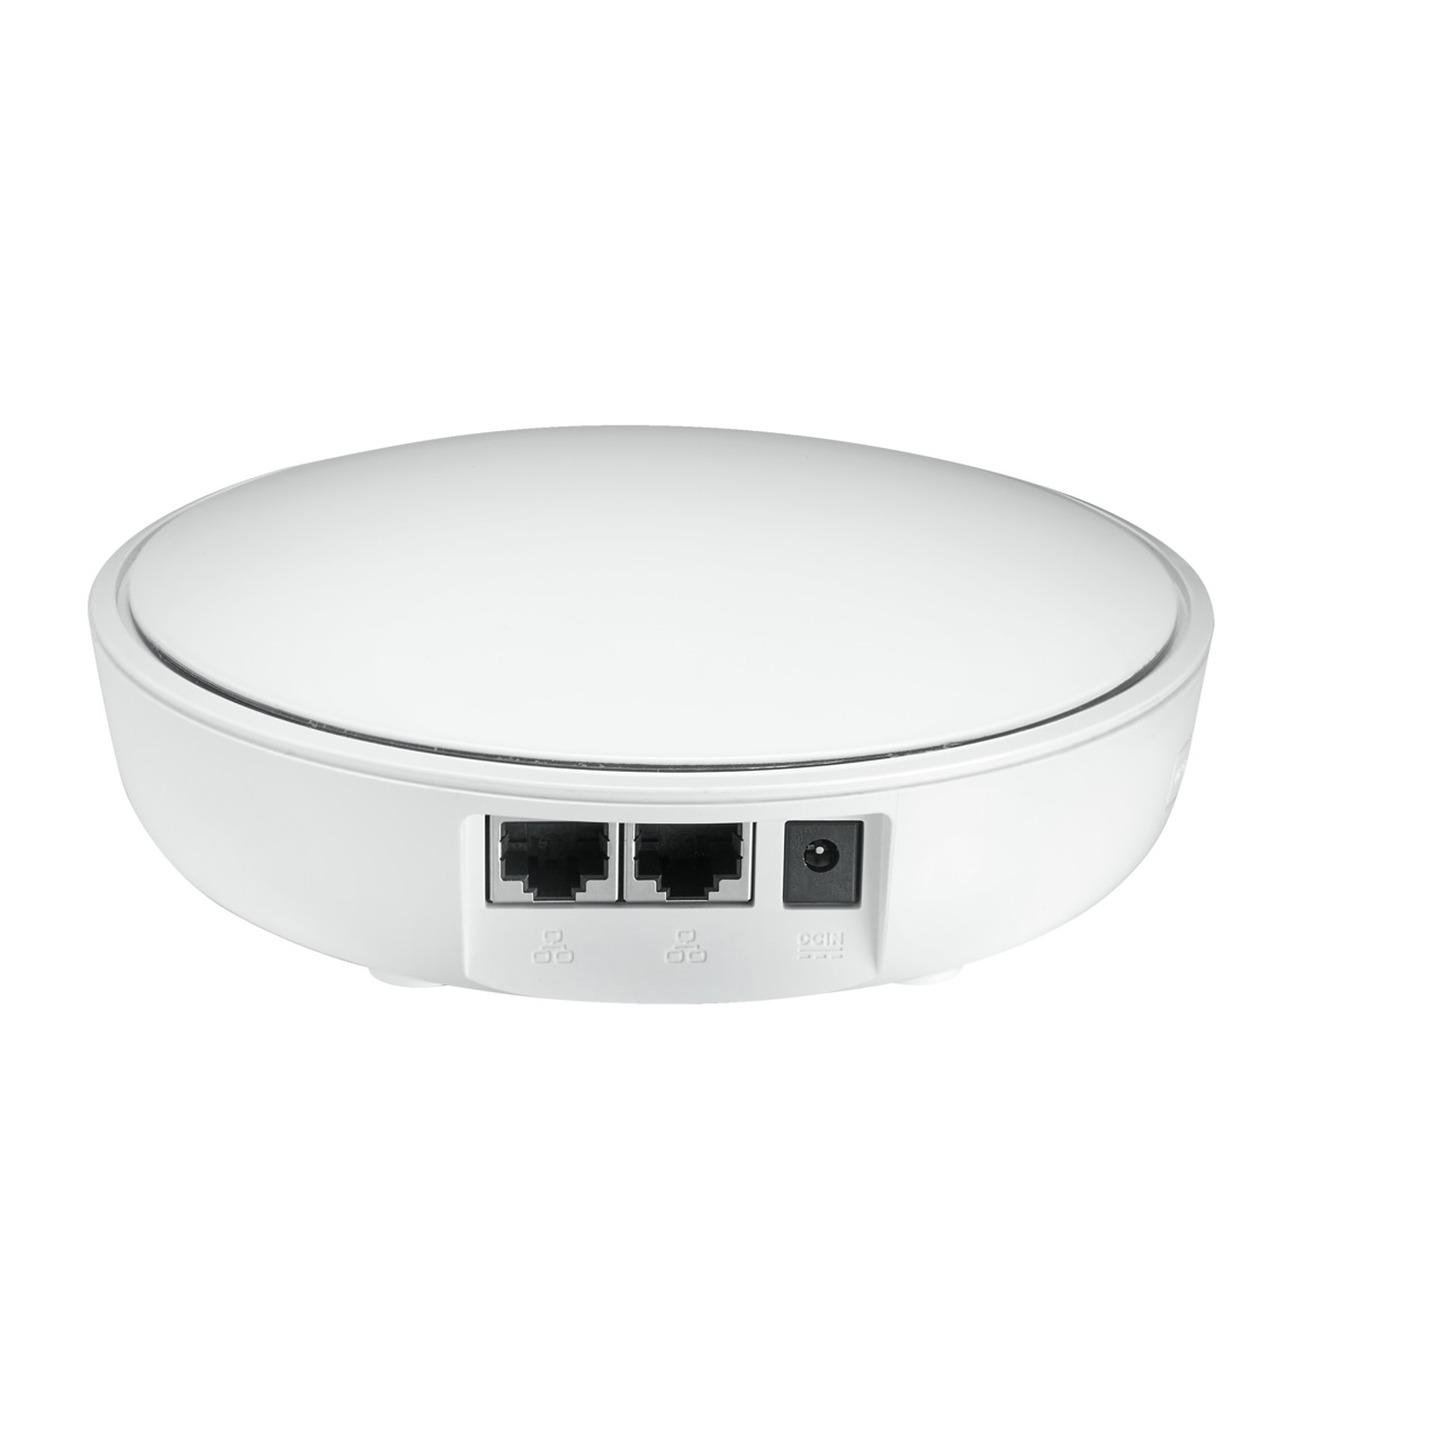 ASUS Lyra Whole-Home Wi-Fi Mesh Network